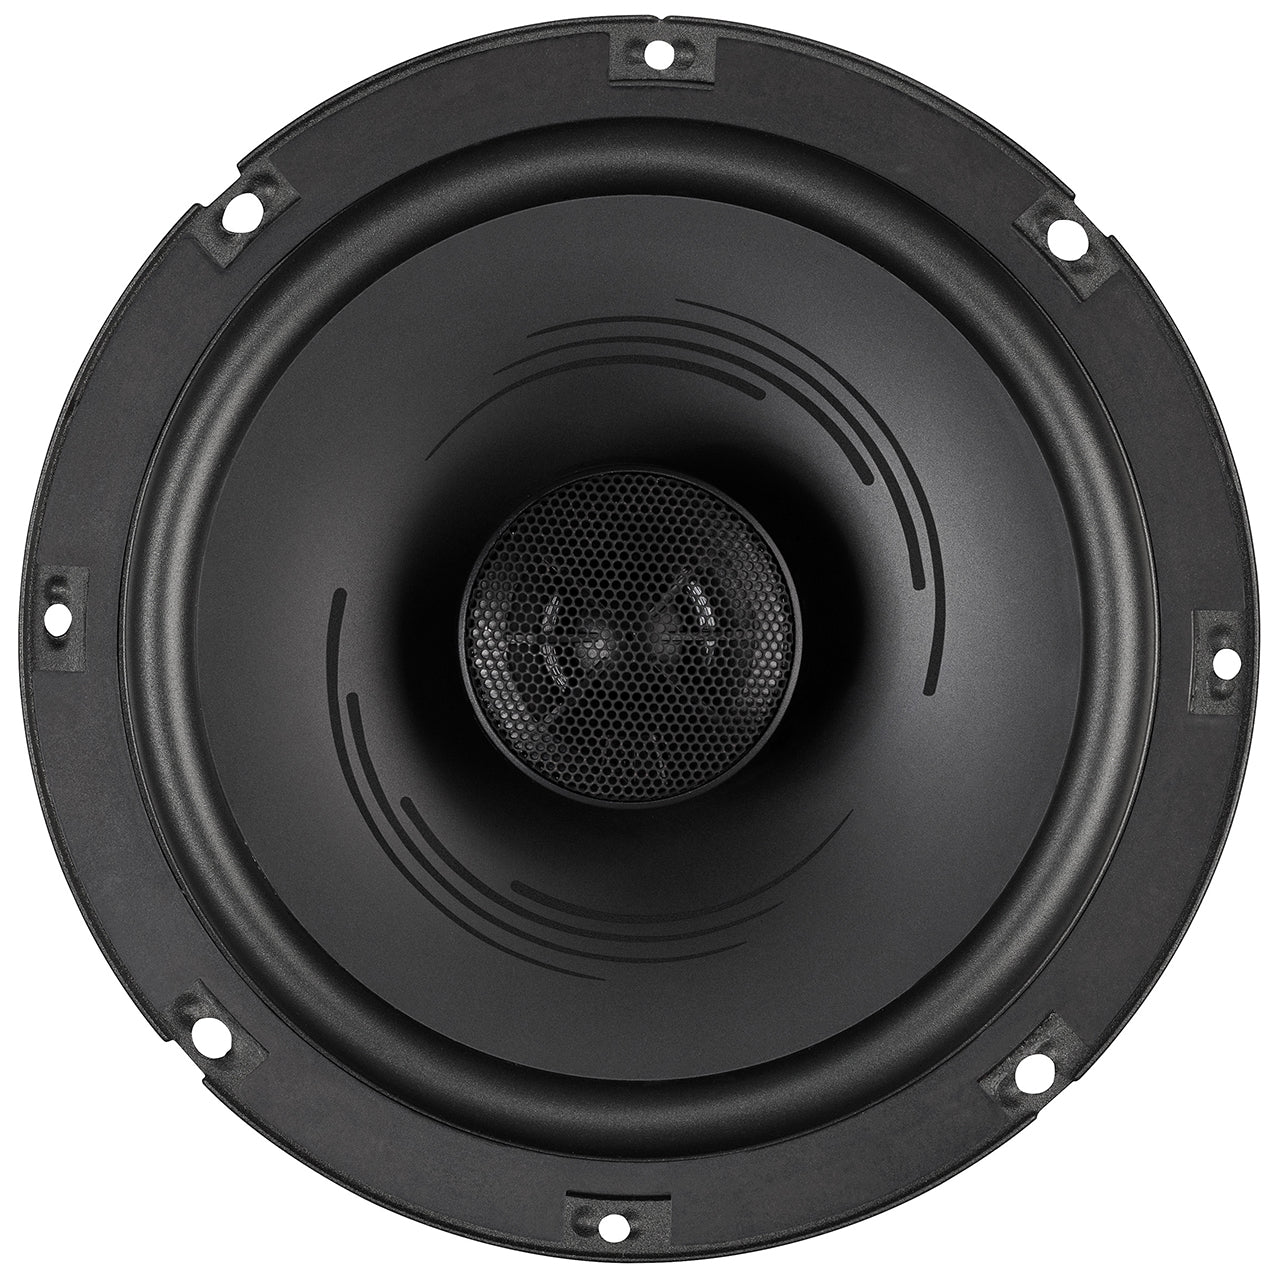 HELIX PF C165.2 6.5" COAXIAL SPEAKERS